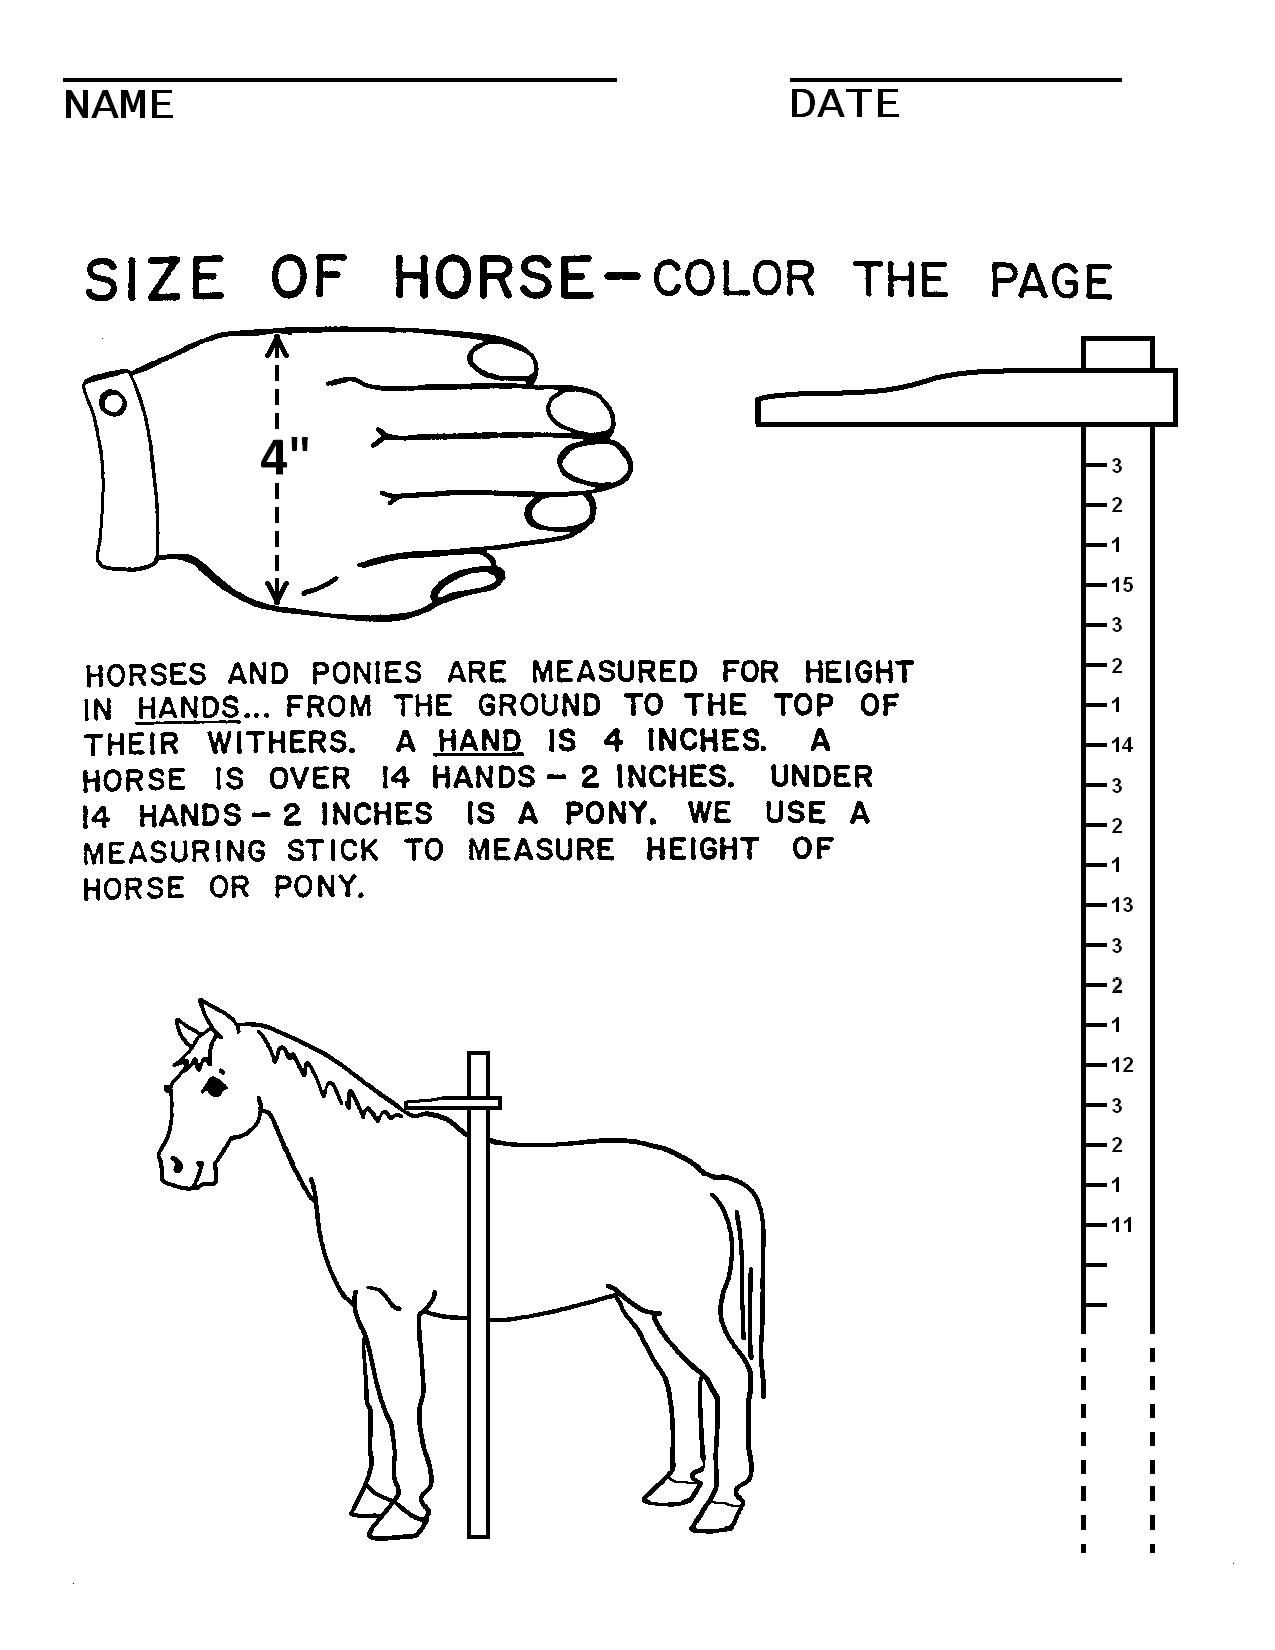 Illustrations Handouts Horse Lessons Horse Riding Tips Horse Camp